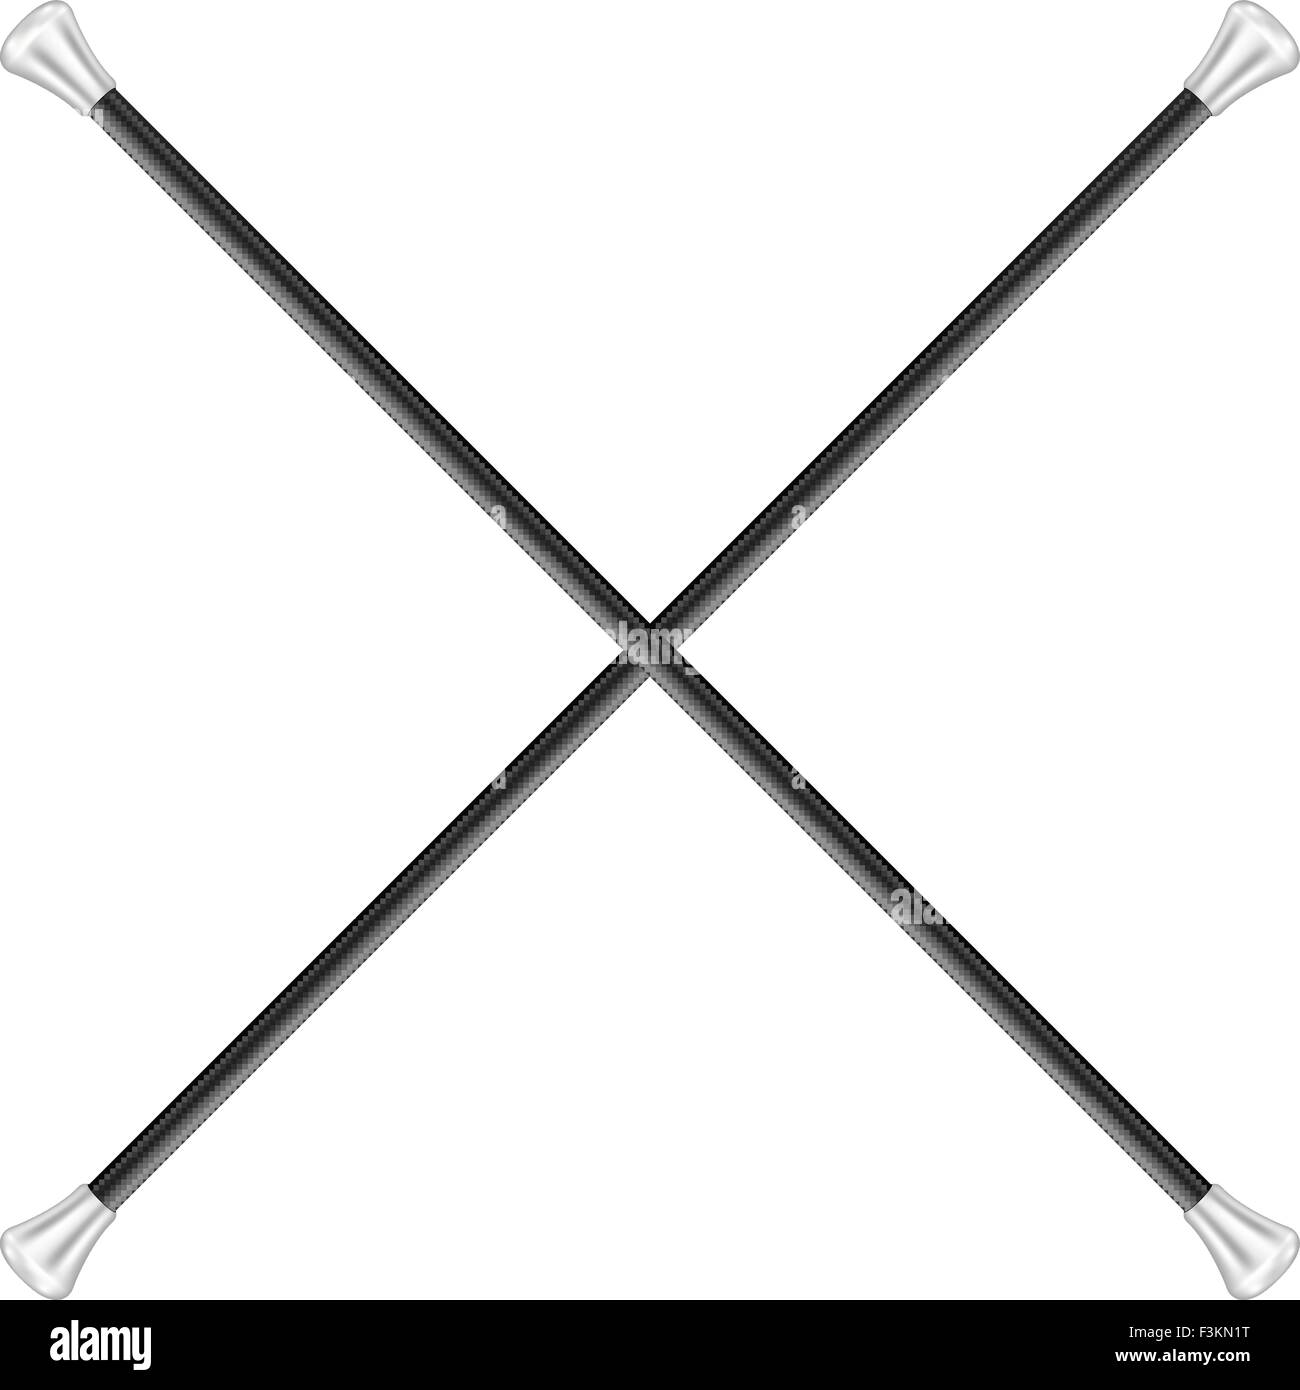 Two crossed twirling batons in black and silver design Stock Vector